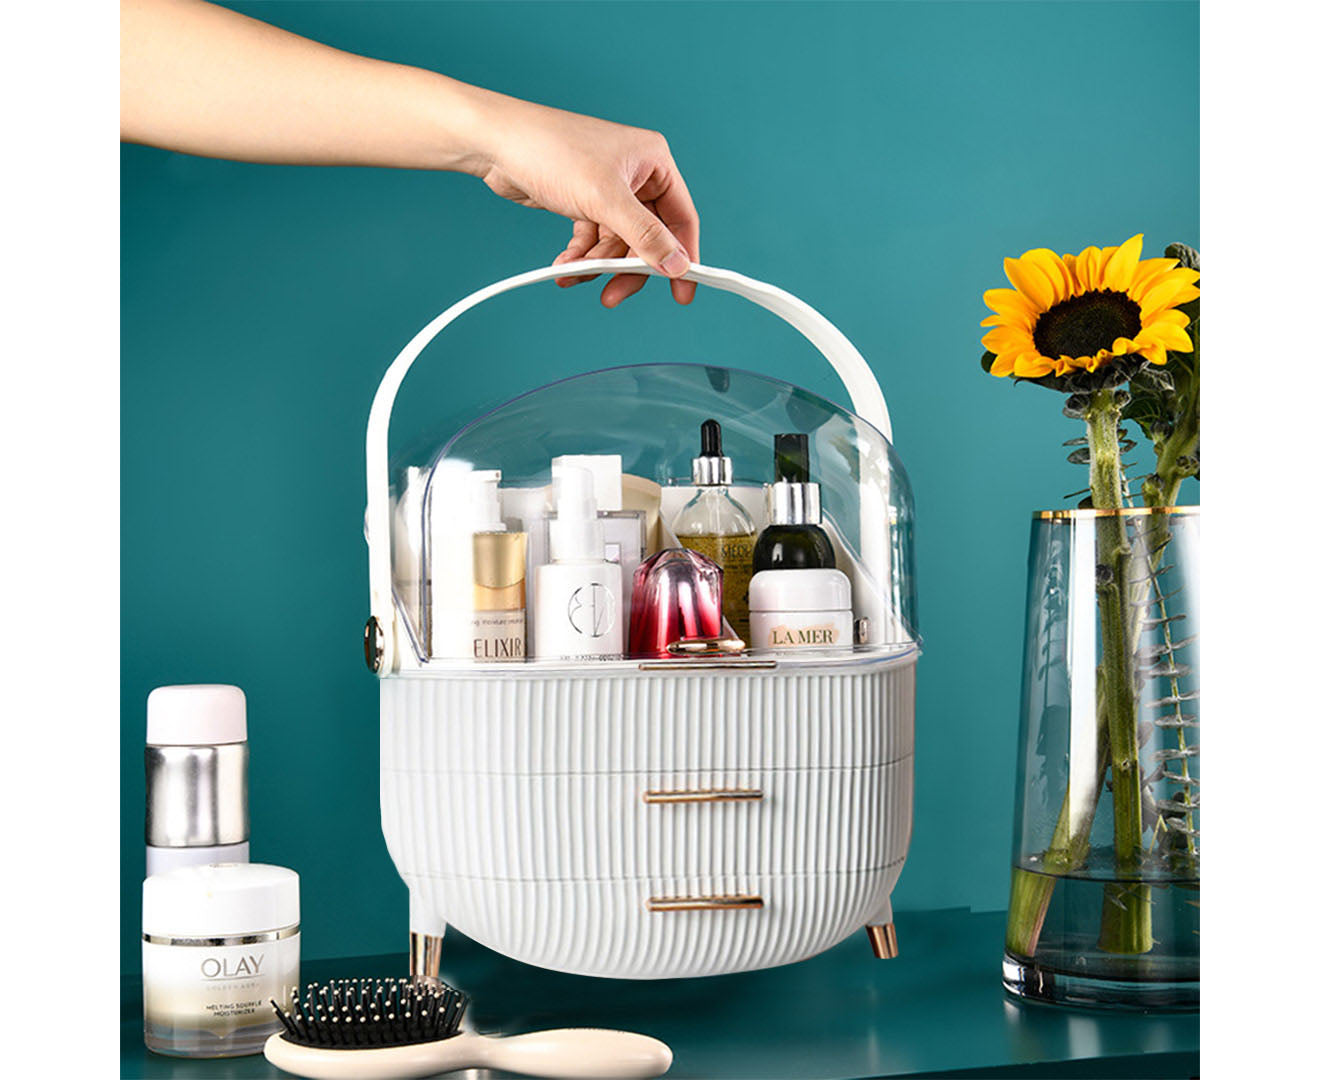 SOGA 2X 29cm White Countertop Makeup Cosmetic Storage Organiser Skincare Holder Jewelry Storage Box with Handle-Makeup Organisers-PEROZ Accessories